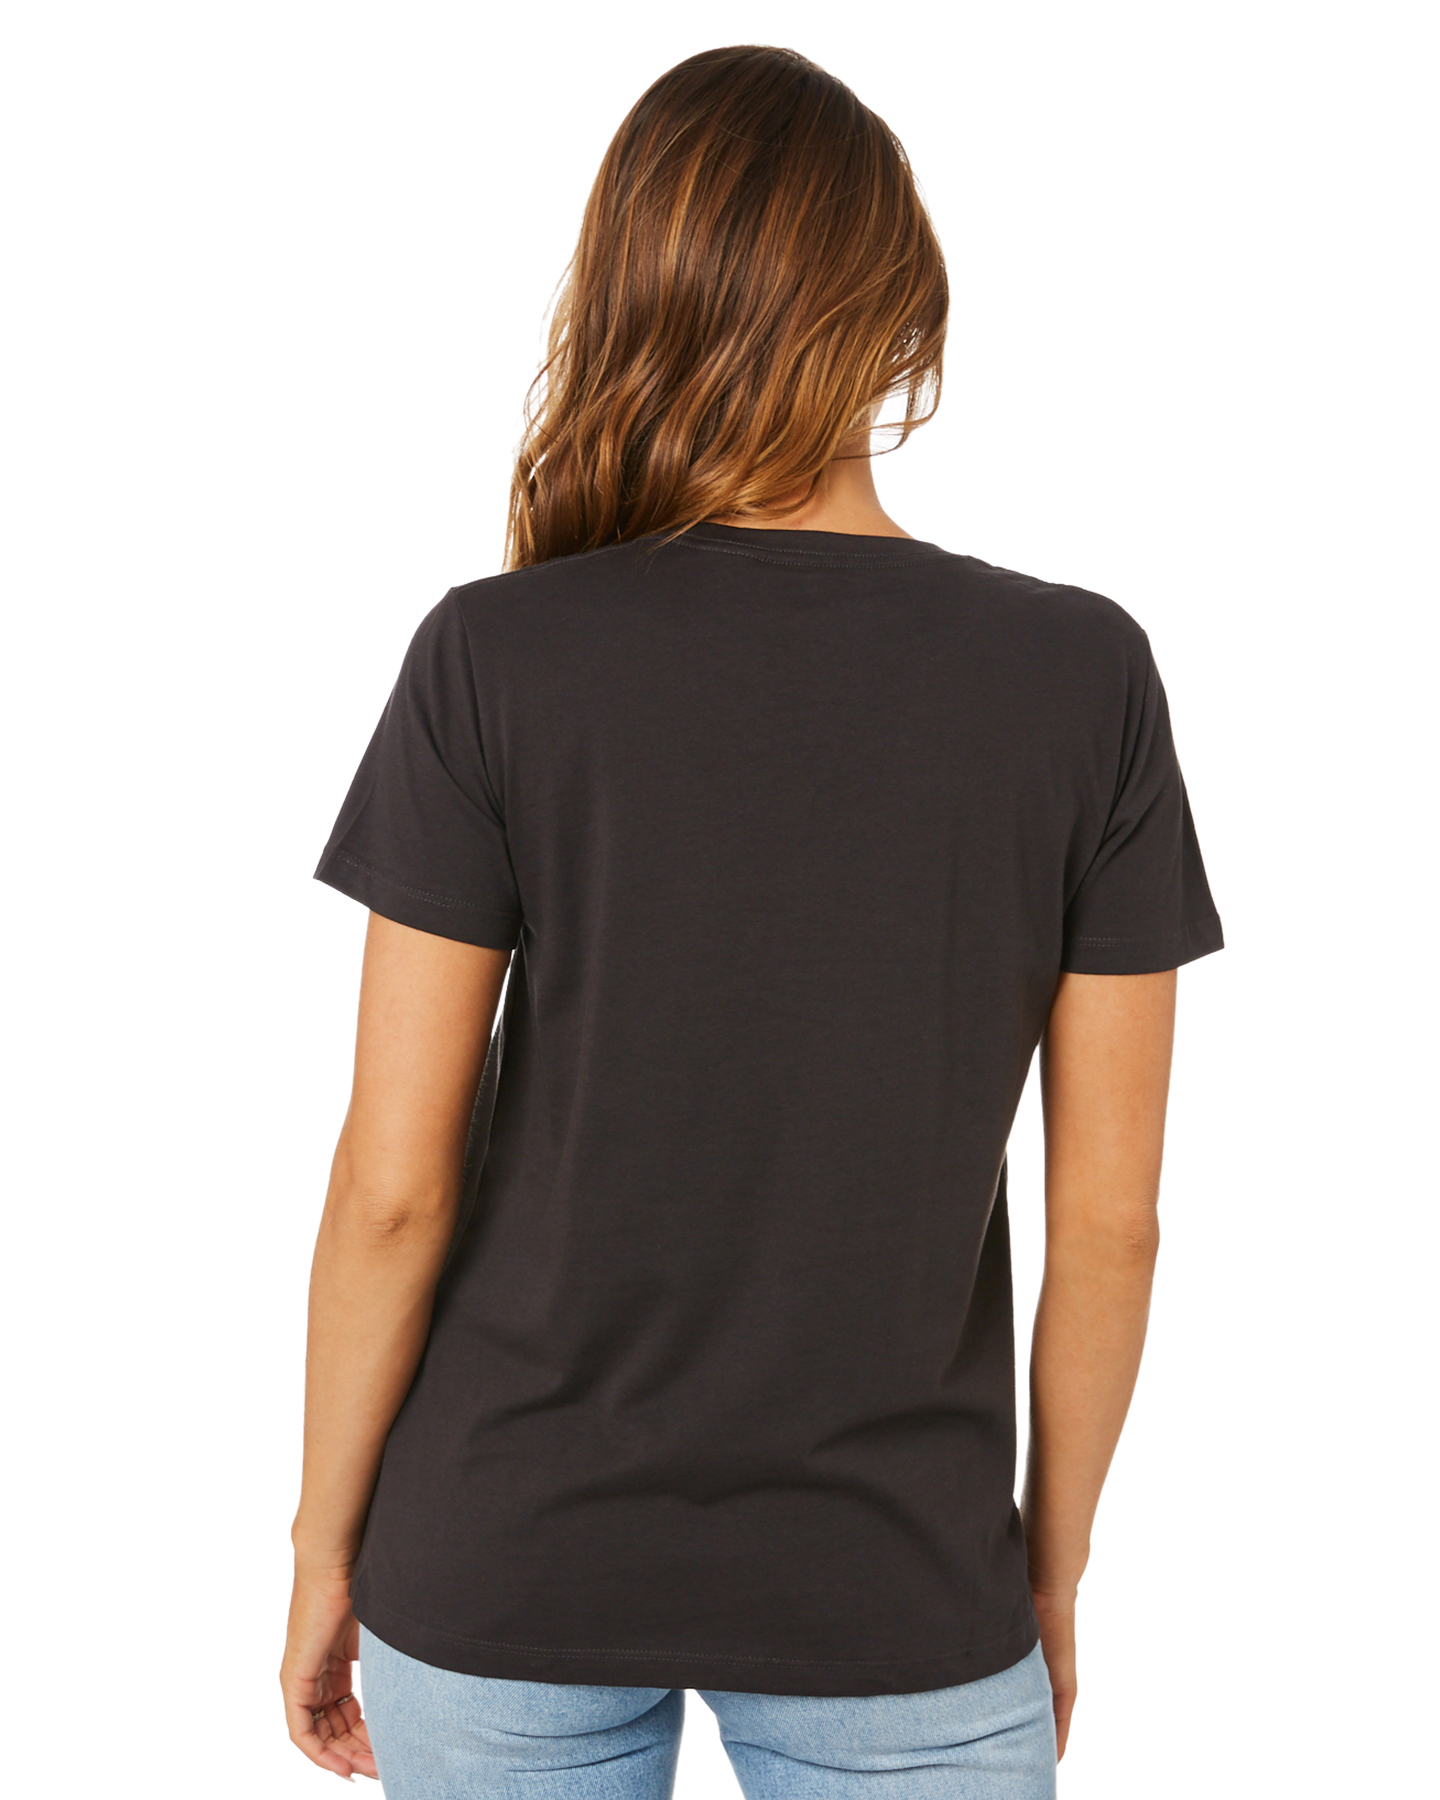 Rip Curl Classic Shore Tee - Washed Black | SurfStitch